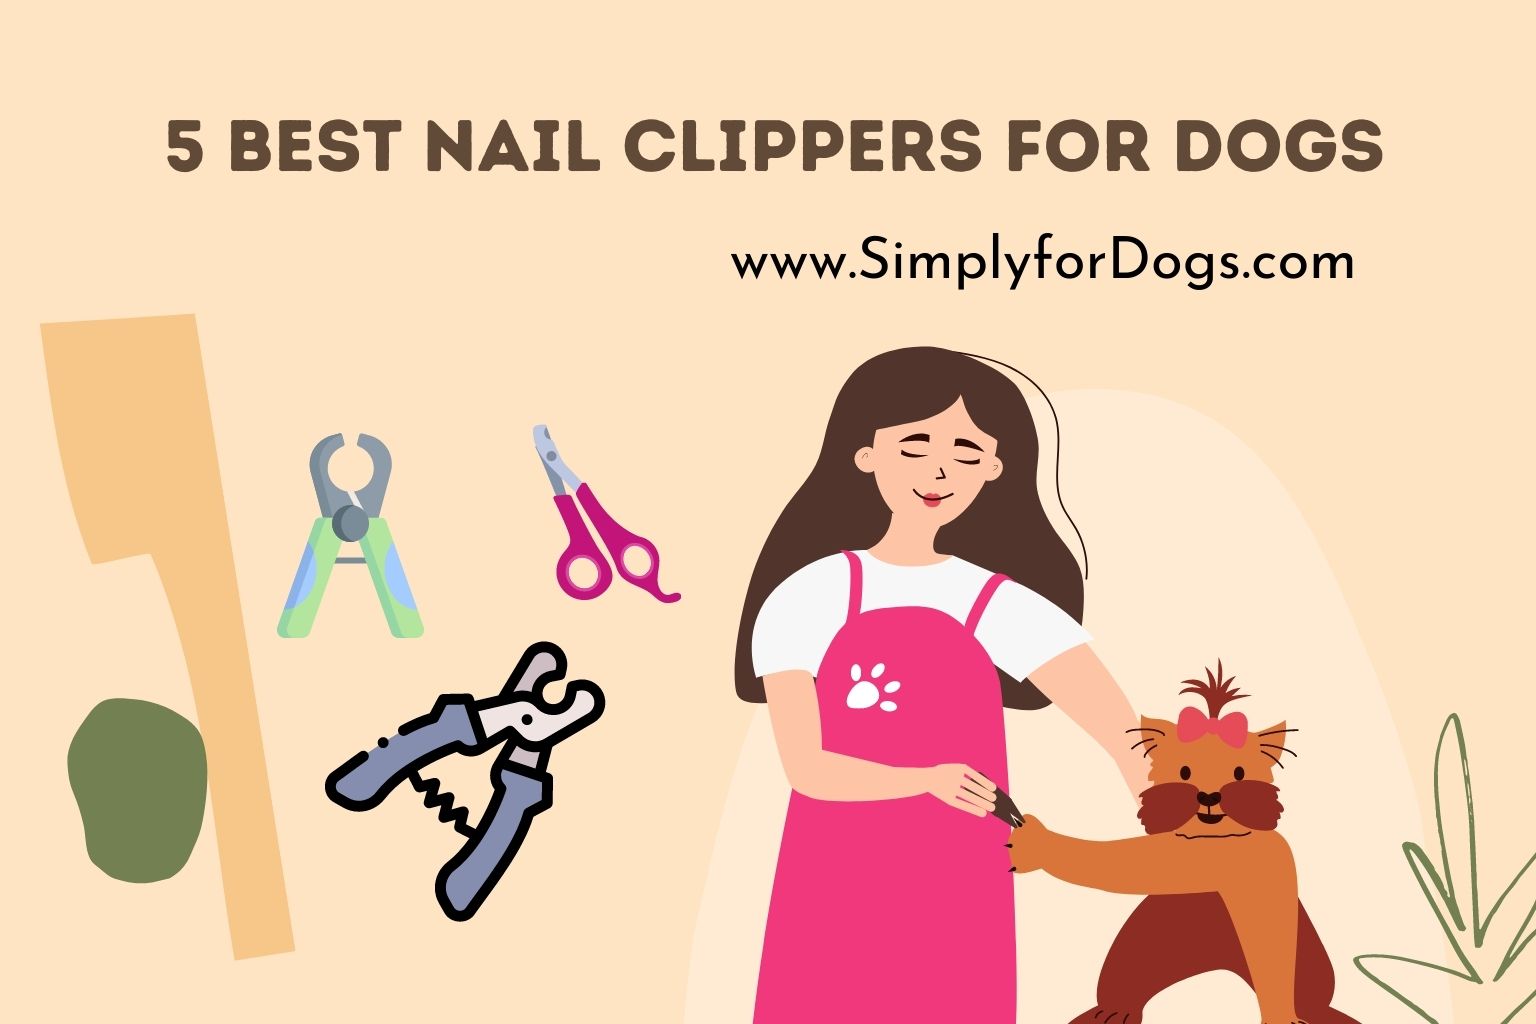 5 Best Nail Clippers for Dogs